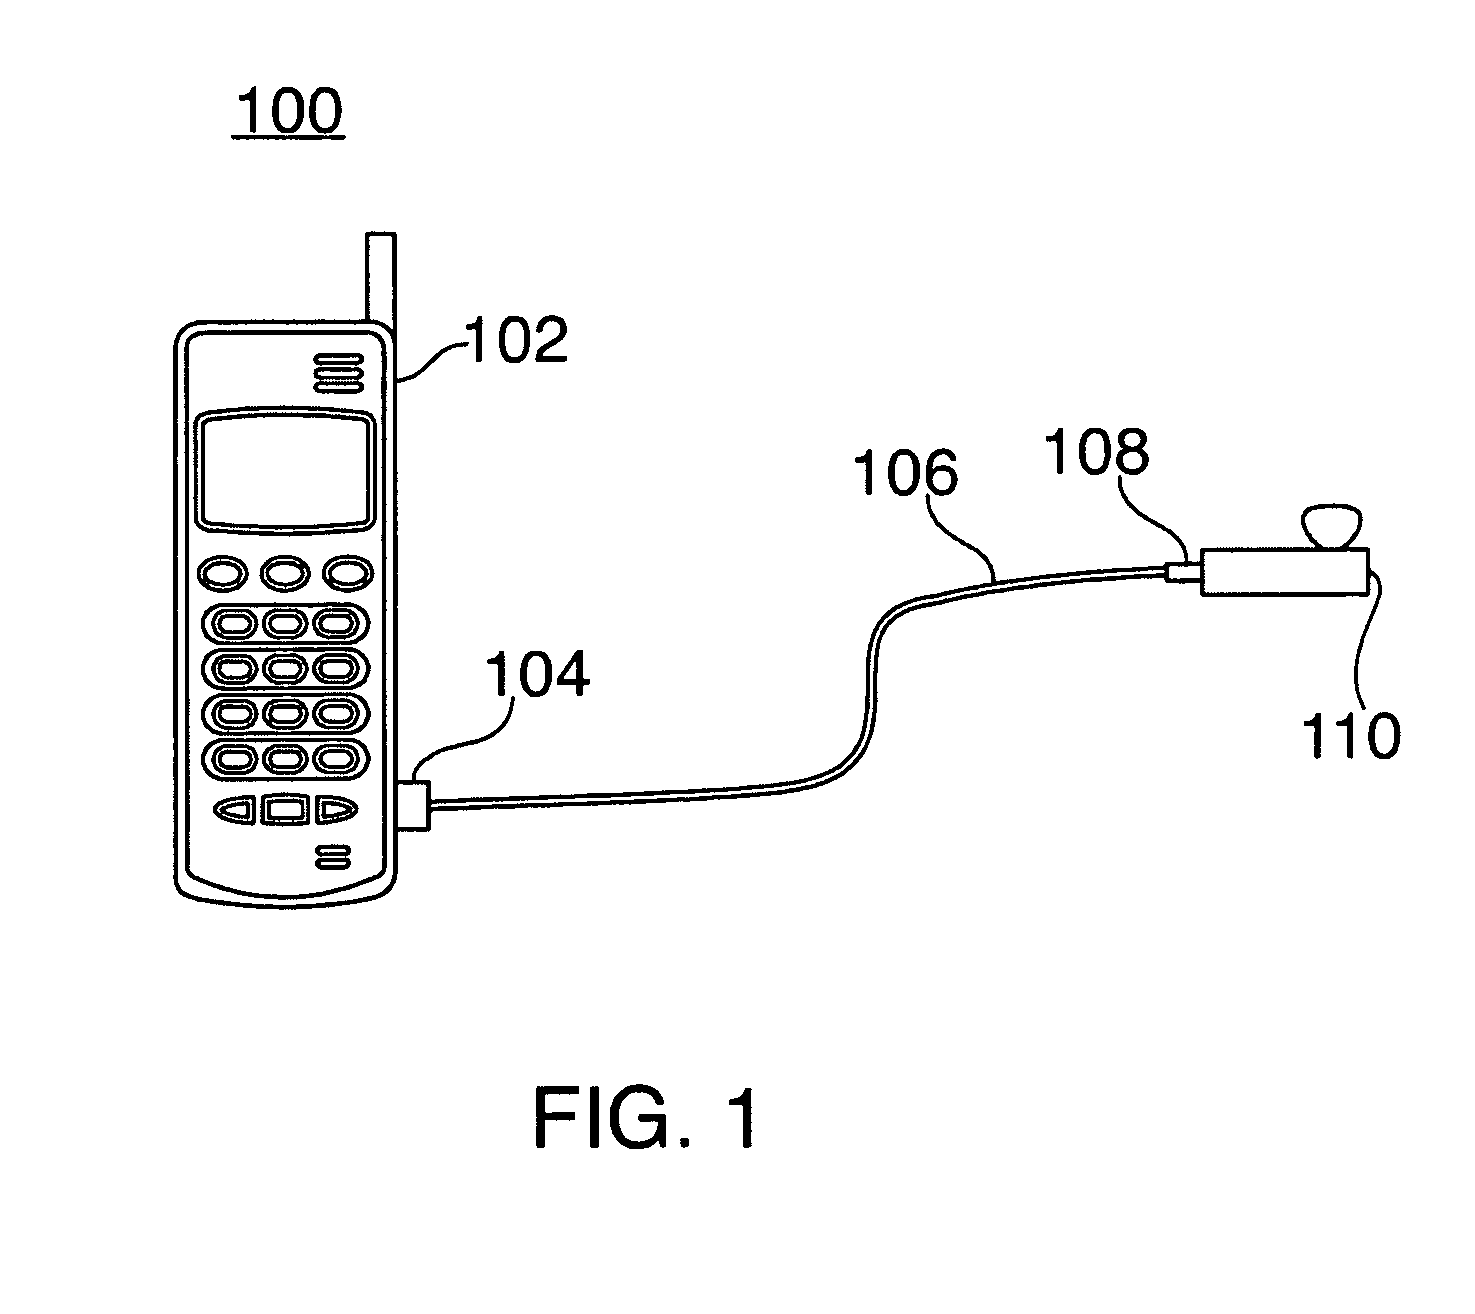 Systems and methods for accelerometer usage in a wireless headset